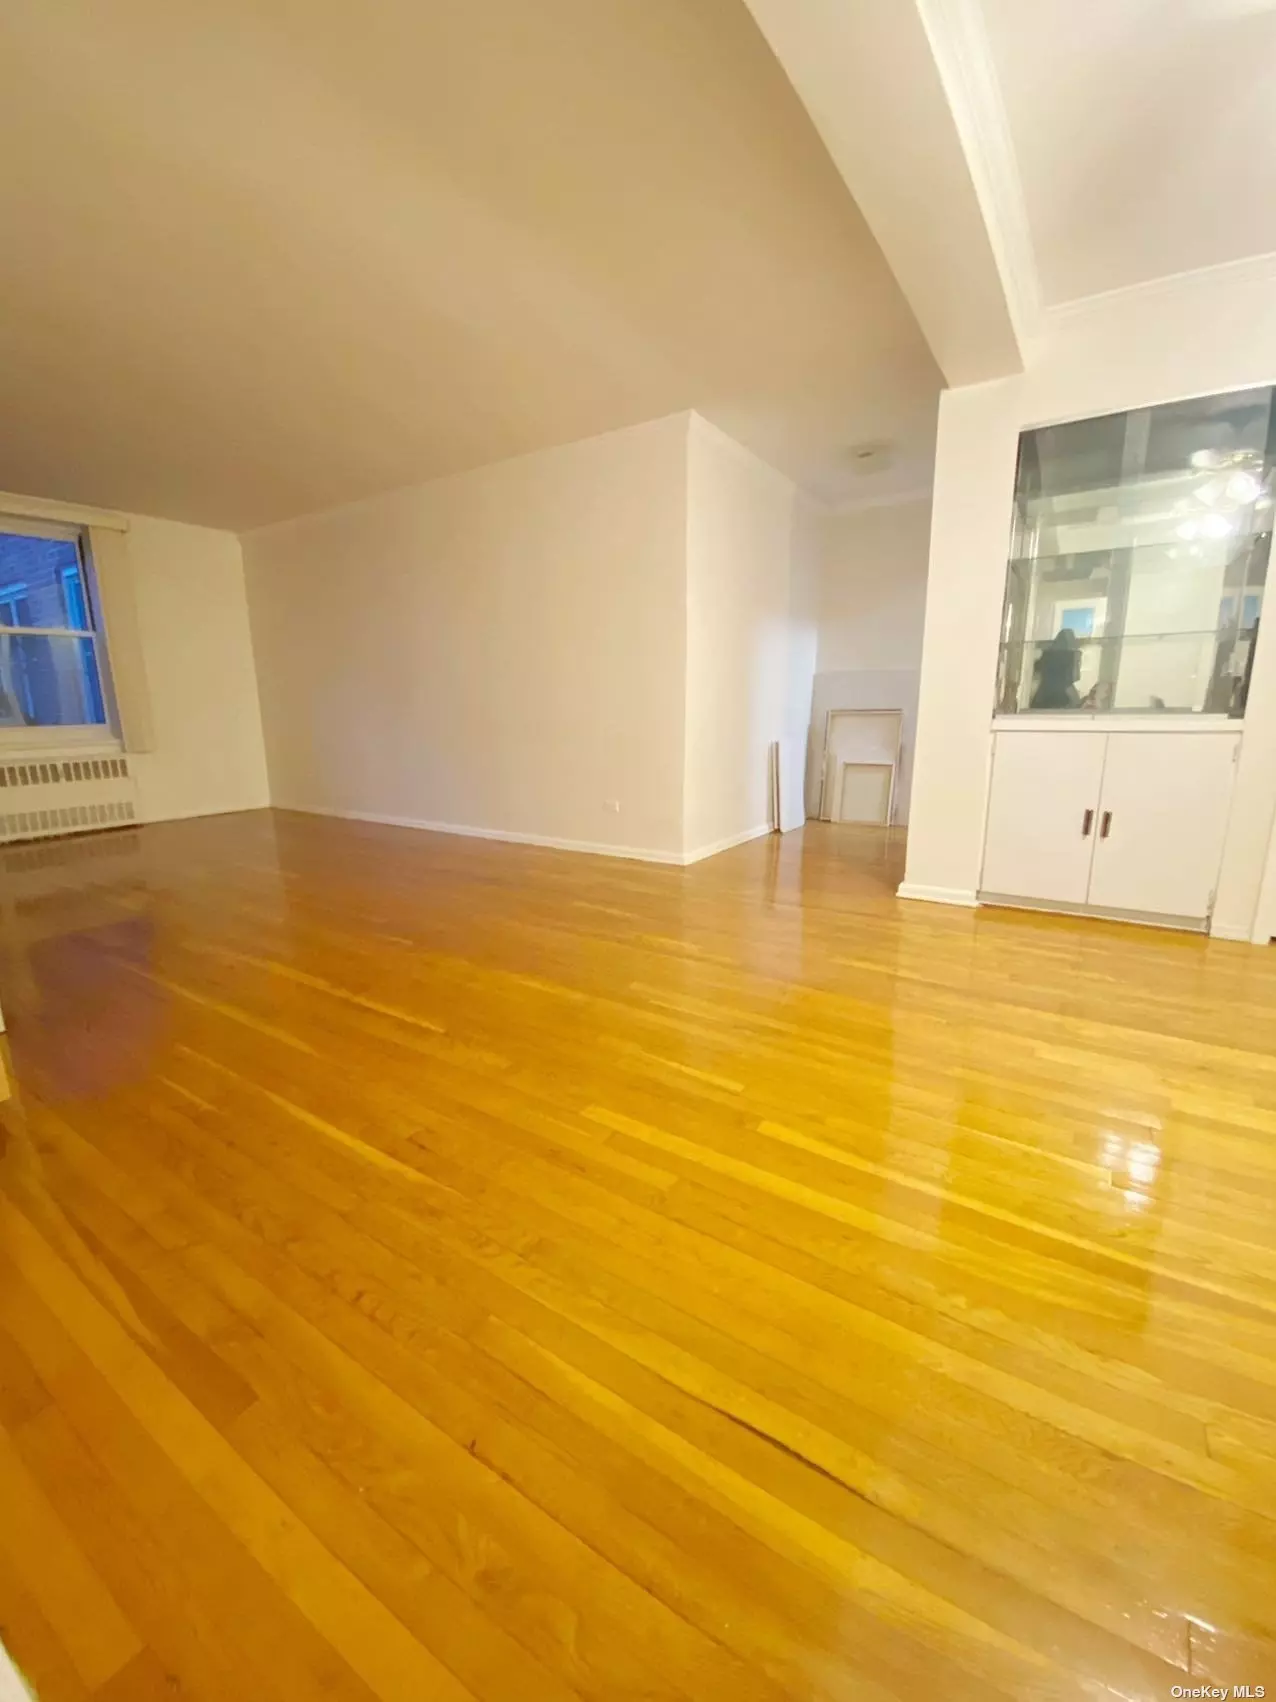 Spacious bright one bedroom co-op with excellent location and condition in heart of Flushing. Features oak hardwood flooring throughout the unit. Low maintenance is only $801.95 include water, heat and gas. Doorman lobby and common laundry room in basement in an elevator building. There are indoor parking space (waiting list). One block from the #7 line, L.I.R.R., and buses. As well as malls, shops, restaurants and more. No Subletting.